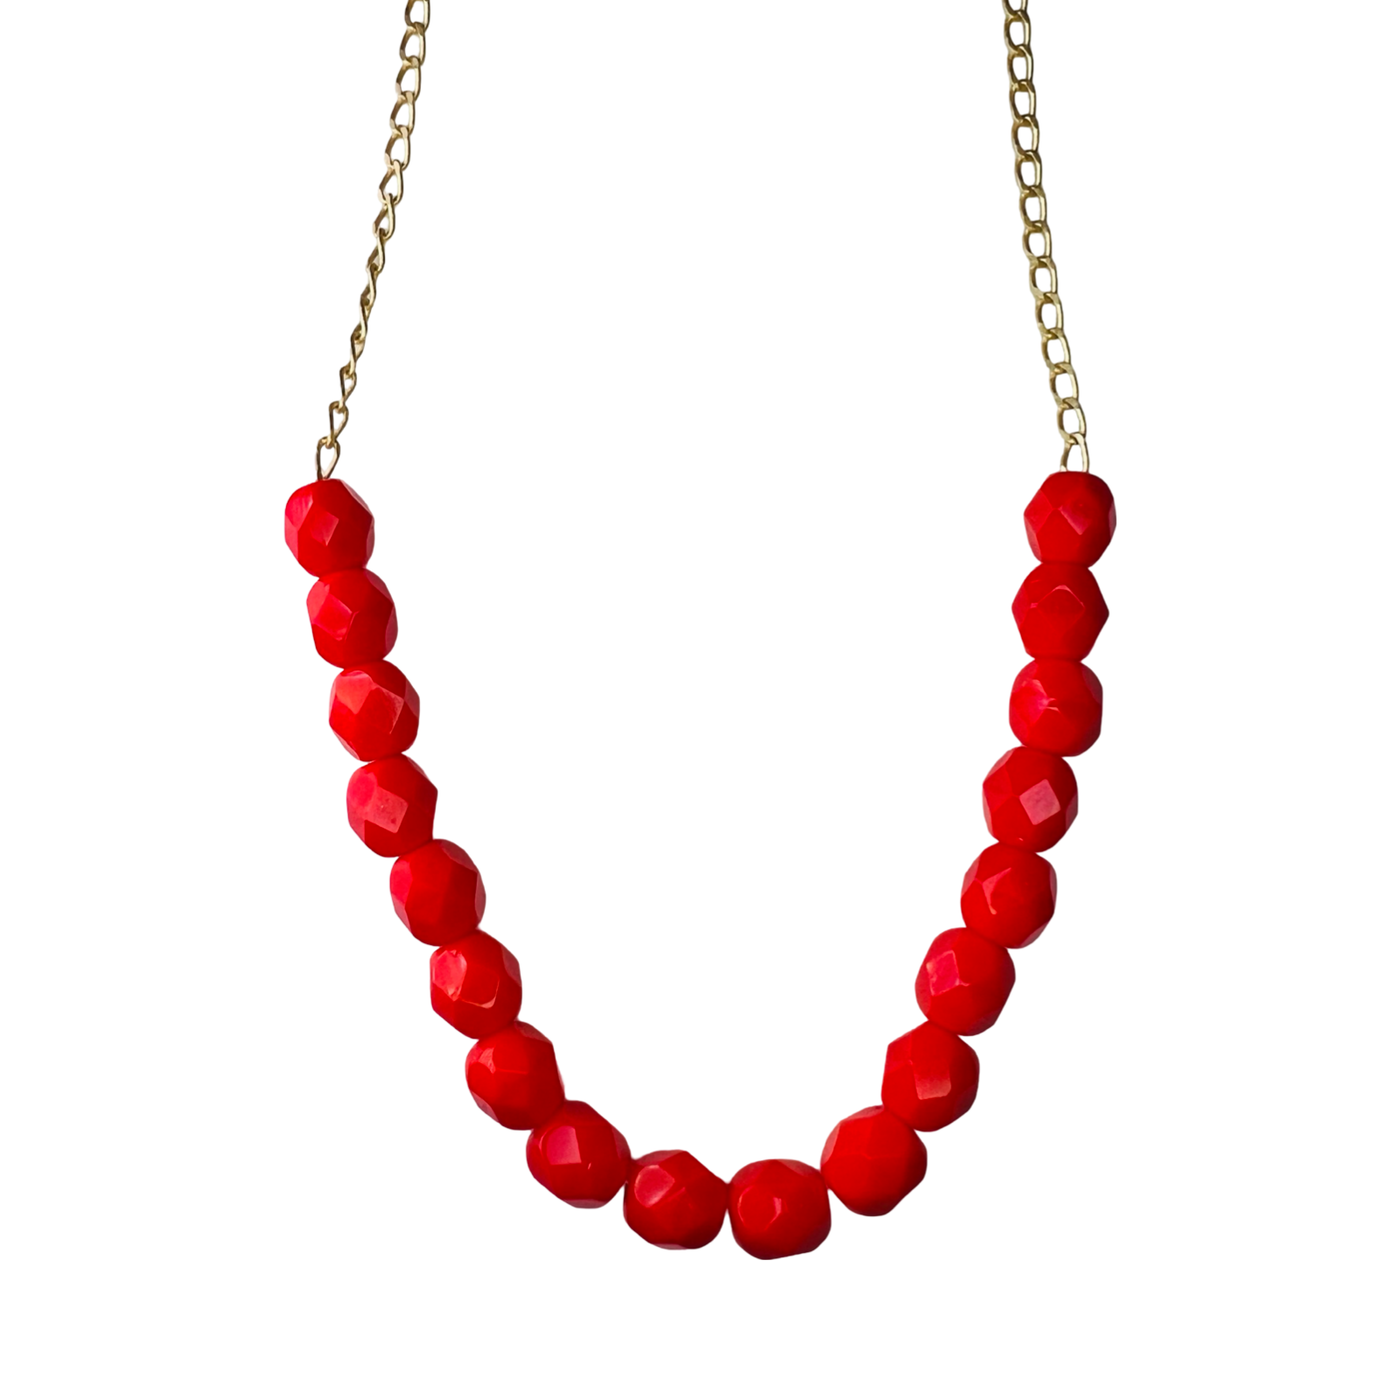 red bead necklace with a gold chain